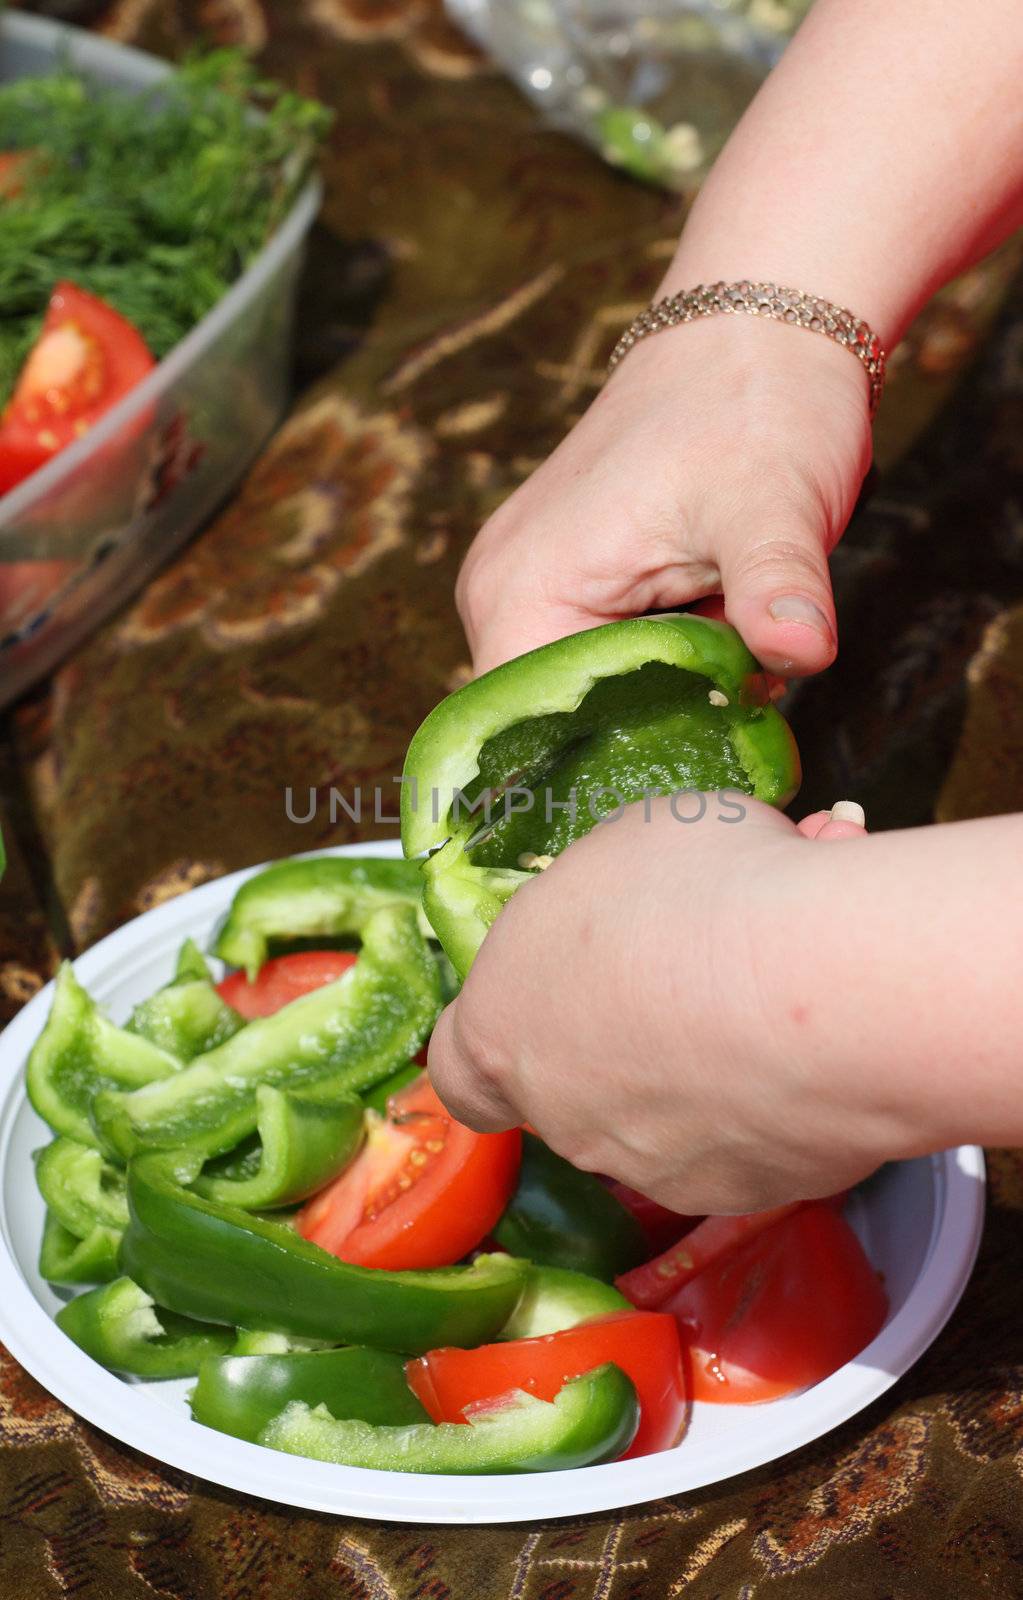 Pepper, vegetable, hand, tomato, knife, plate, picnic, fennel, meal, food, vitamins